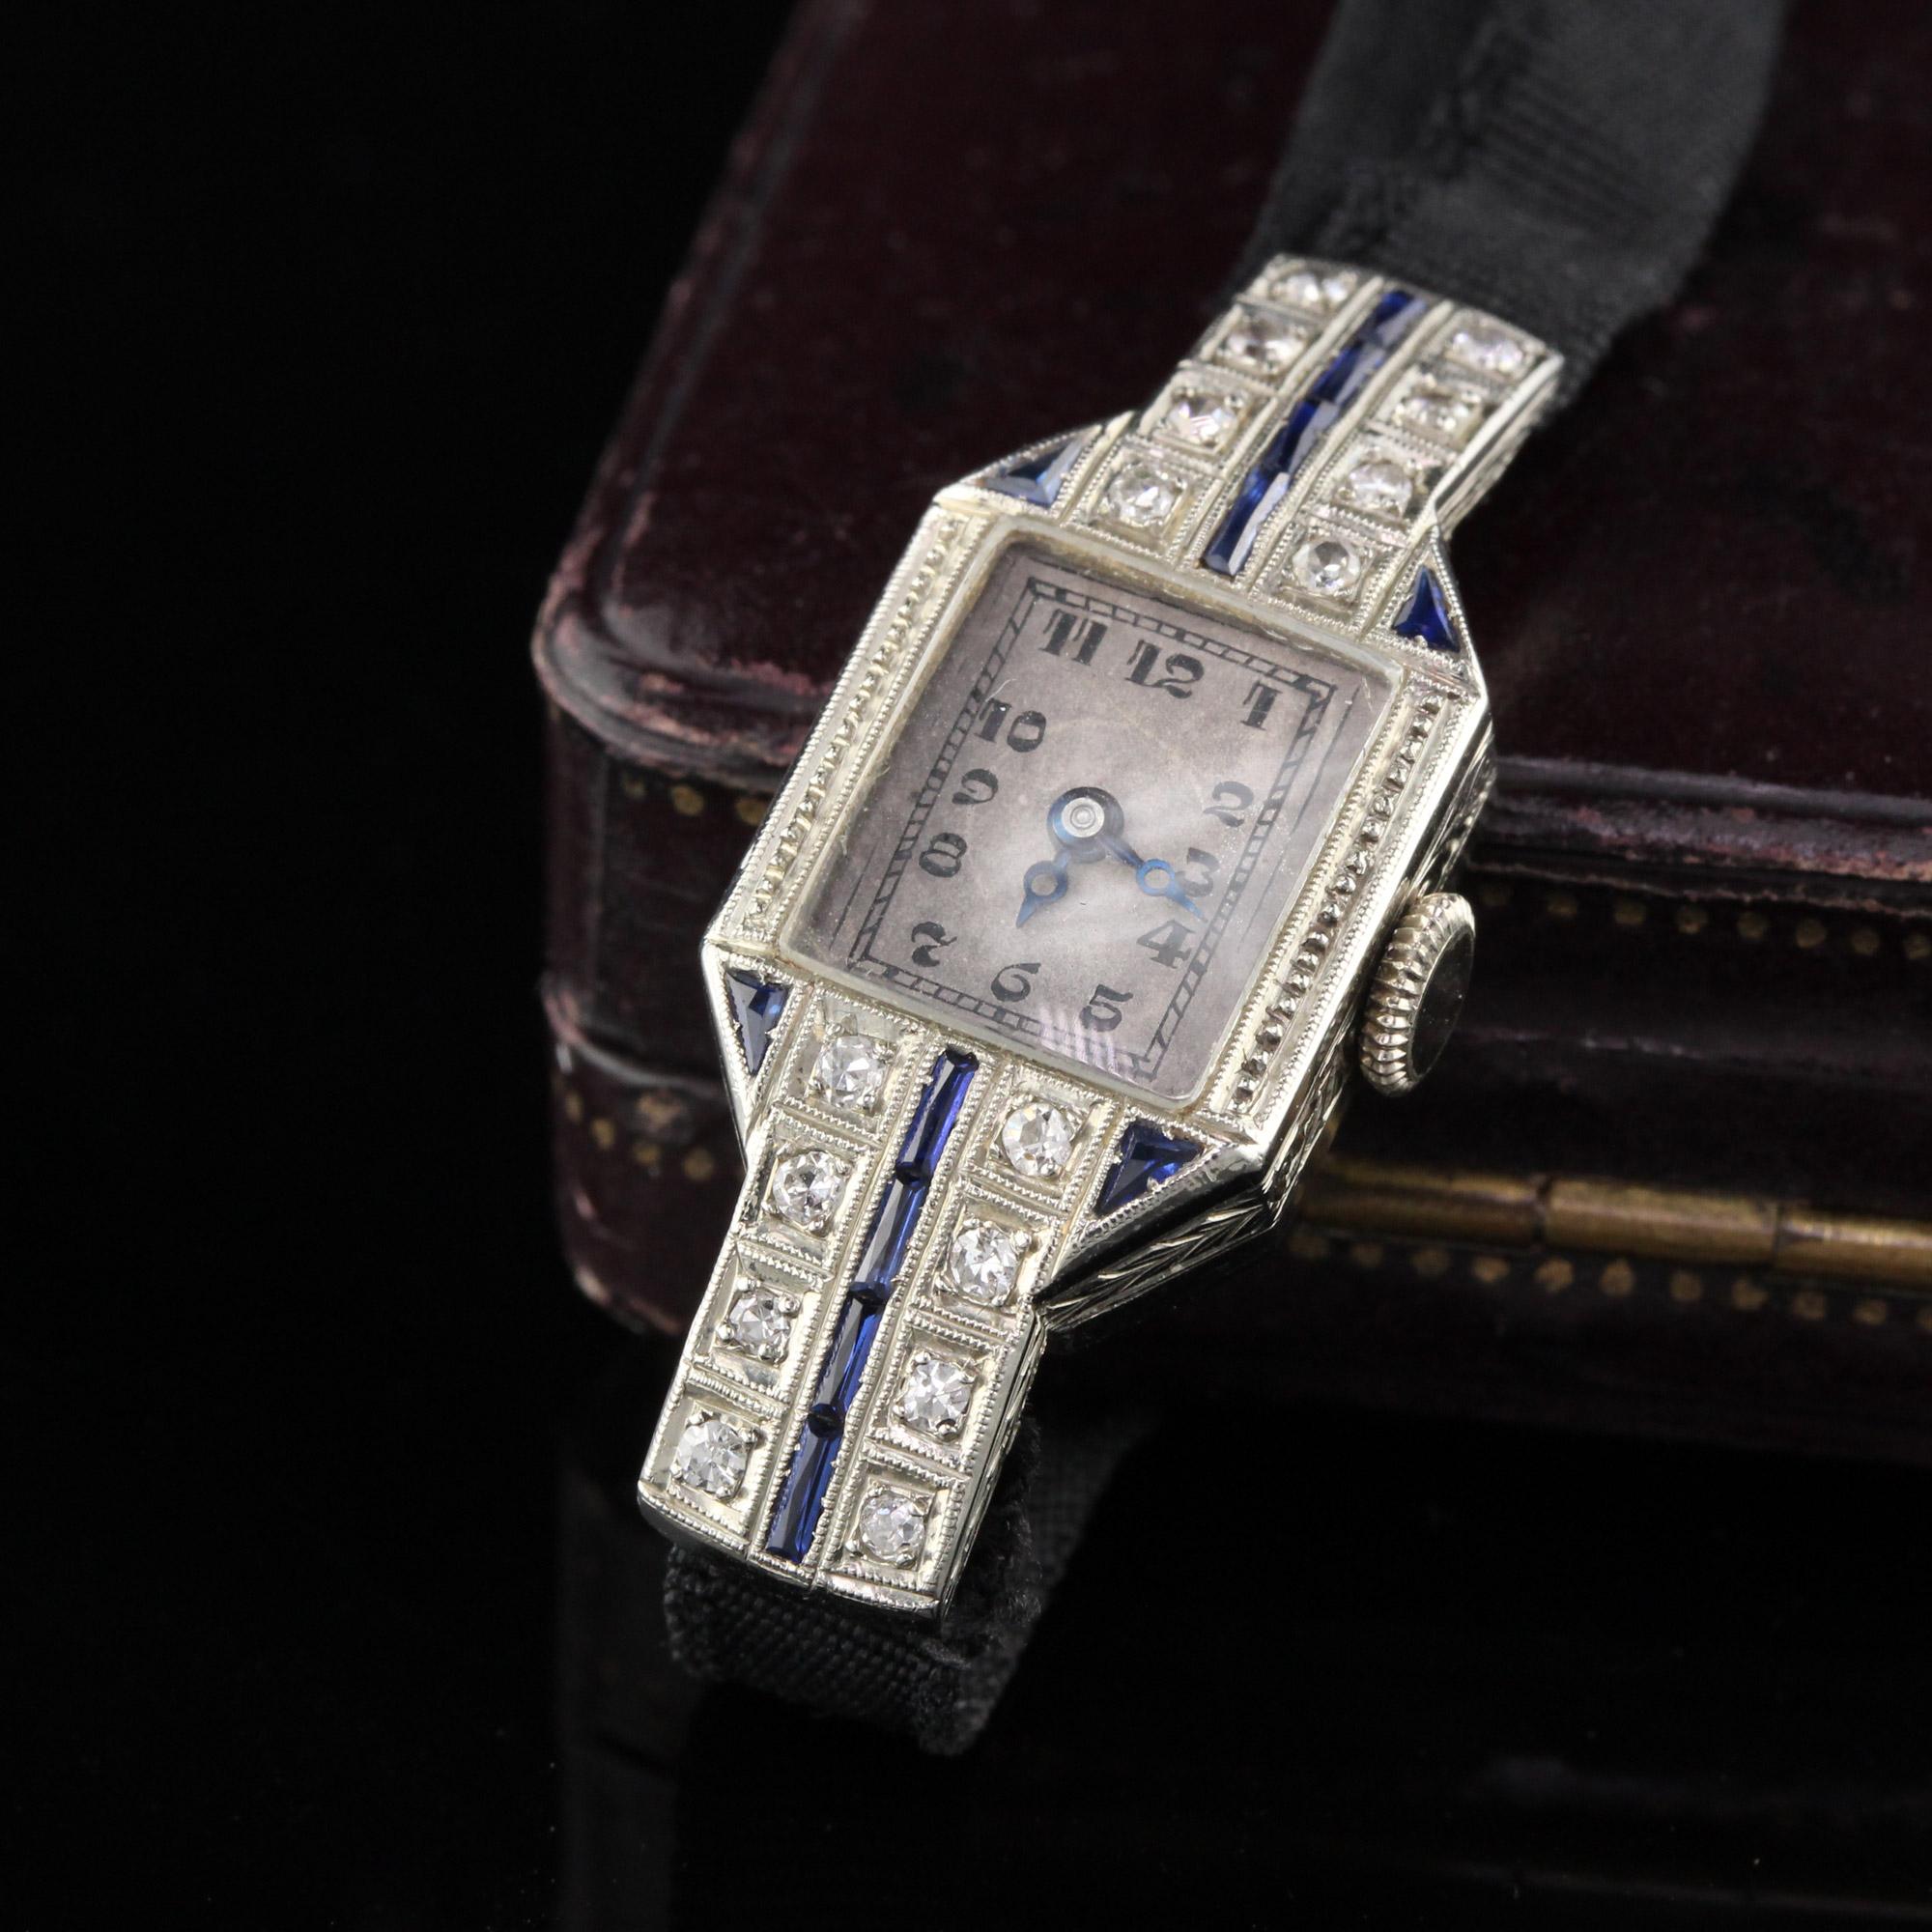 Stunning synthetic sapphire and diamond watch with adjustable fabric band.

Metal: 18K White Gold

Weight: 10.6 Grams

Diamond Weight: Approximately 0.30 cts

Diamond Color: H

Diamond Clarity: SI1

Measurements: Face measures 34.95 x 15.41 mm. Band